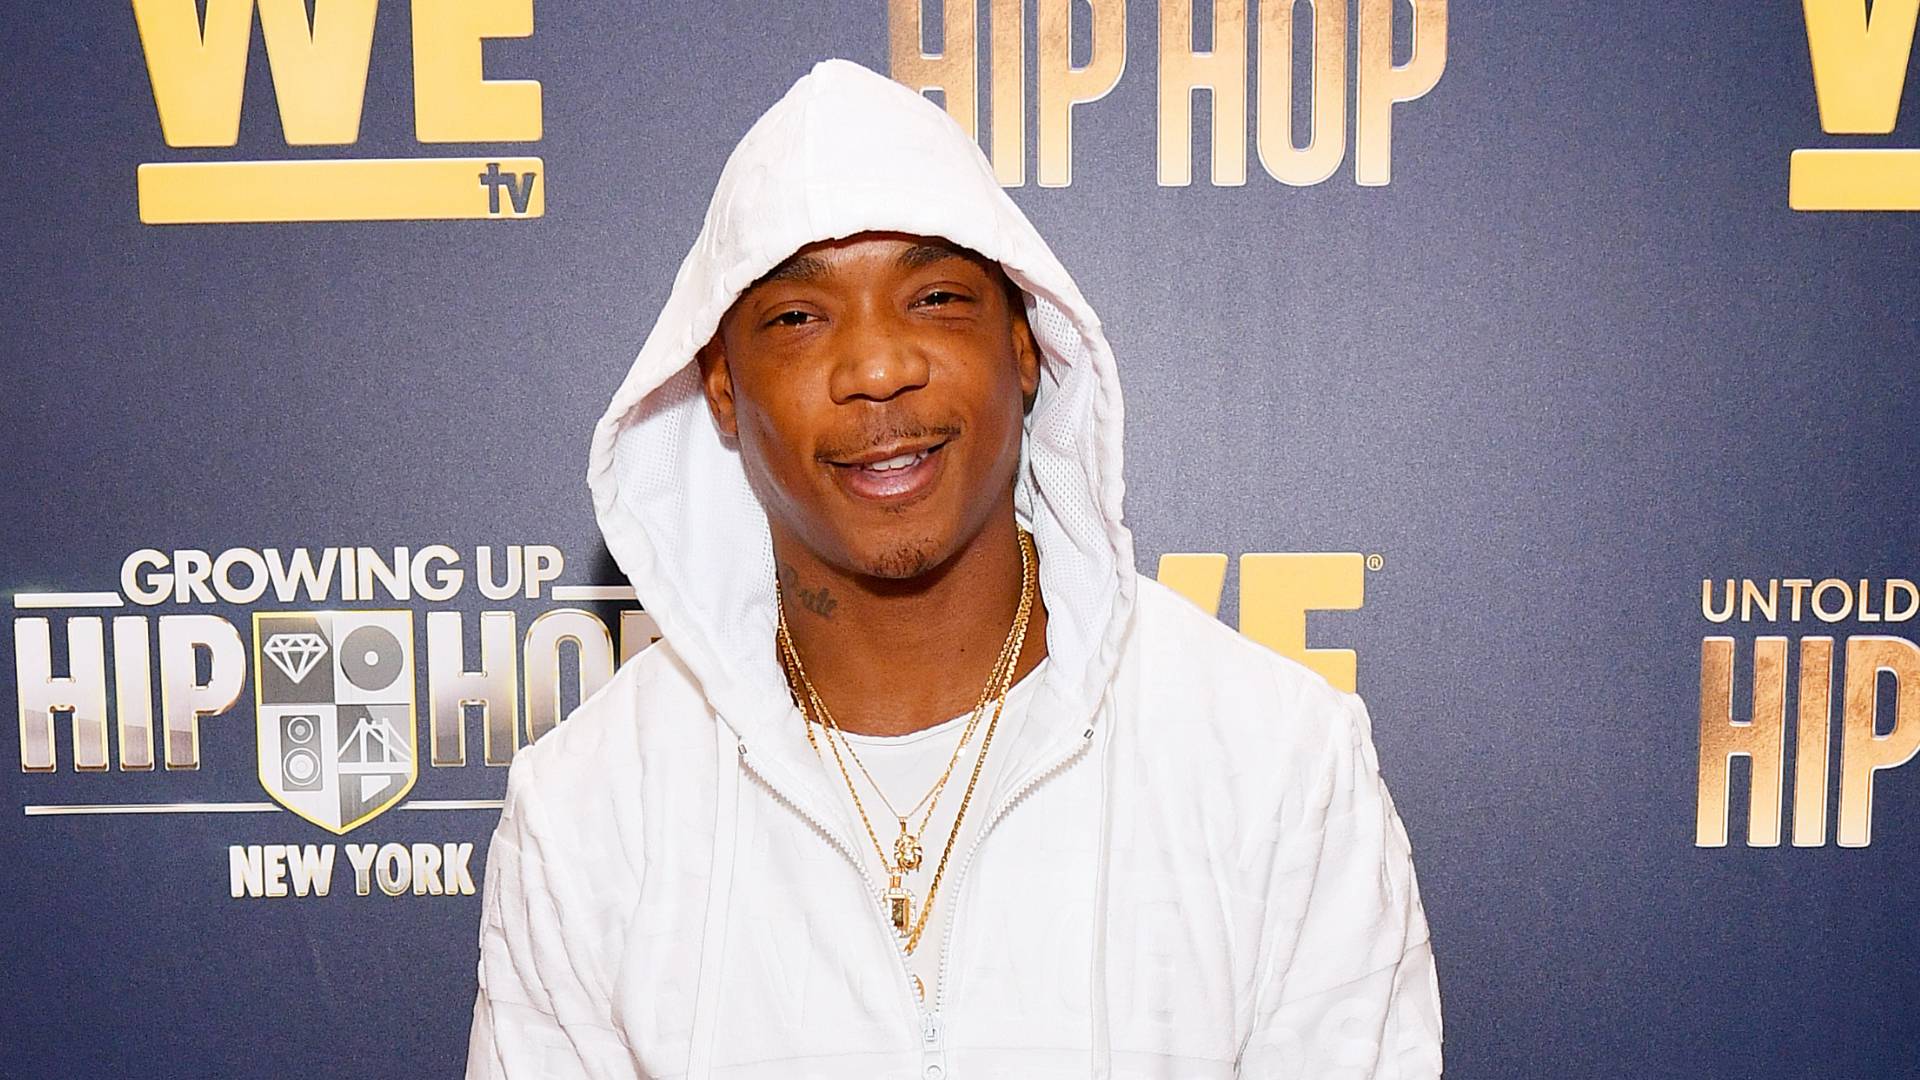 Ja Rule attends as WEtv celebrates the premieres of Growing Up Hip Hop New York and Untold Stories of Hip Hop on August 19, 2019 in New York City. 